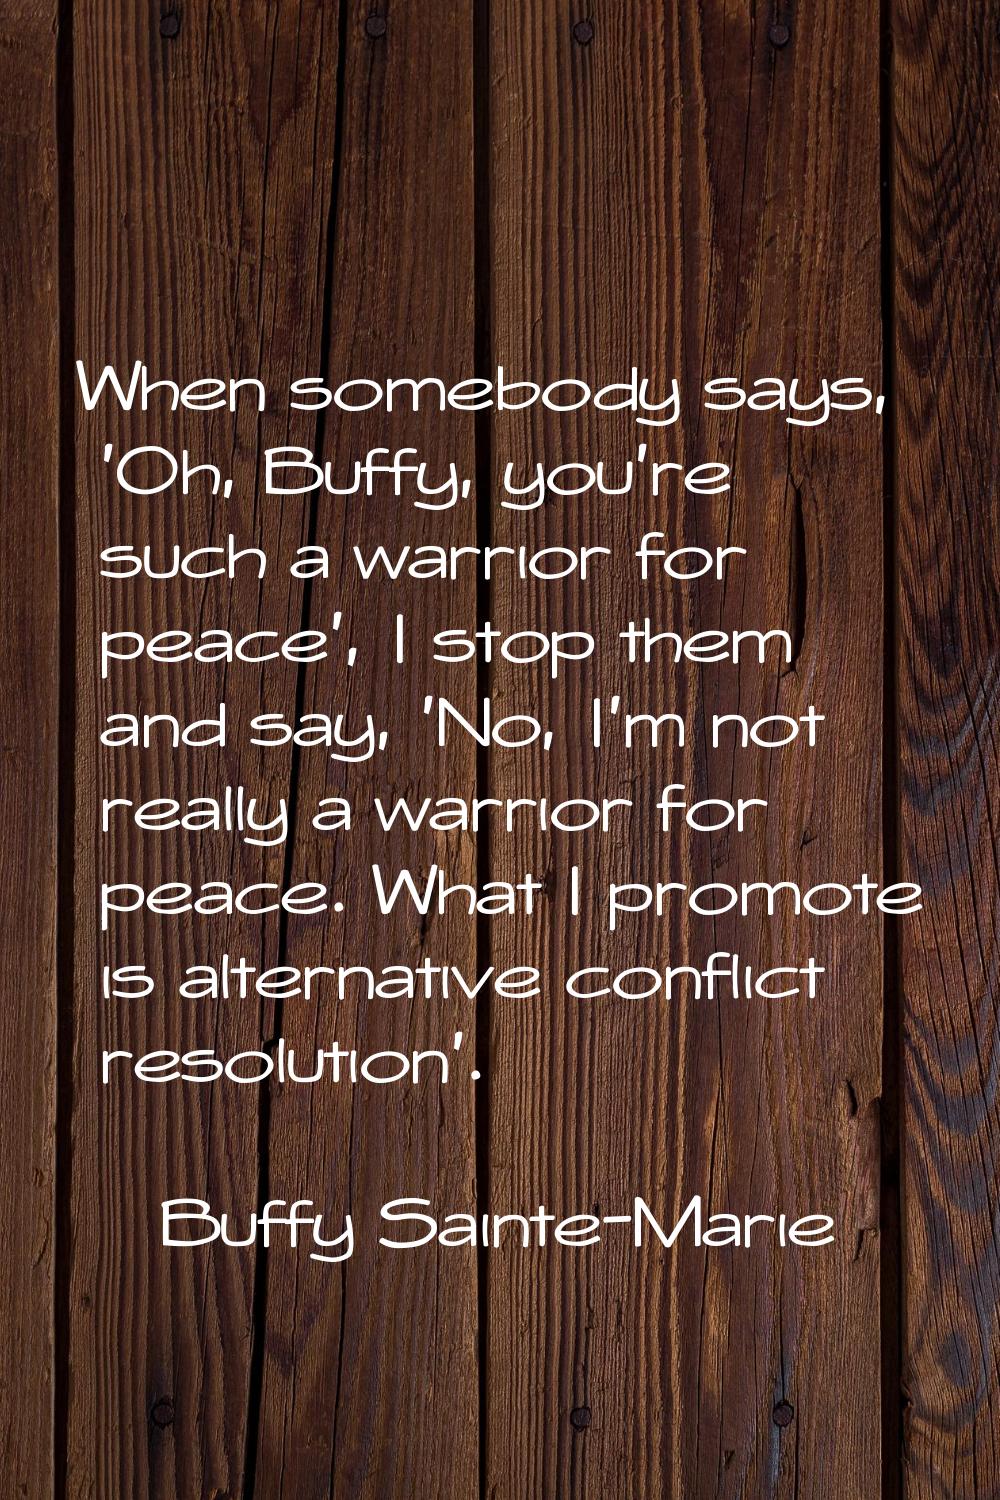 When somebody says, 'Oh, Buffy, you're such a warrior for peace', I stop them and say, 'No, I'm not